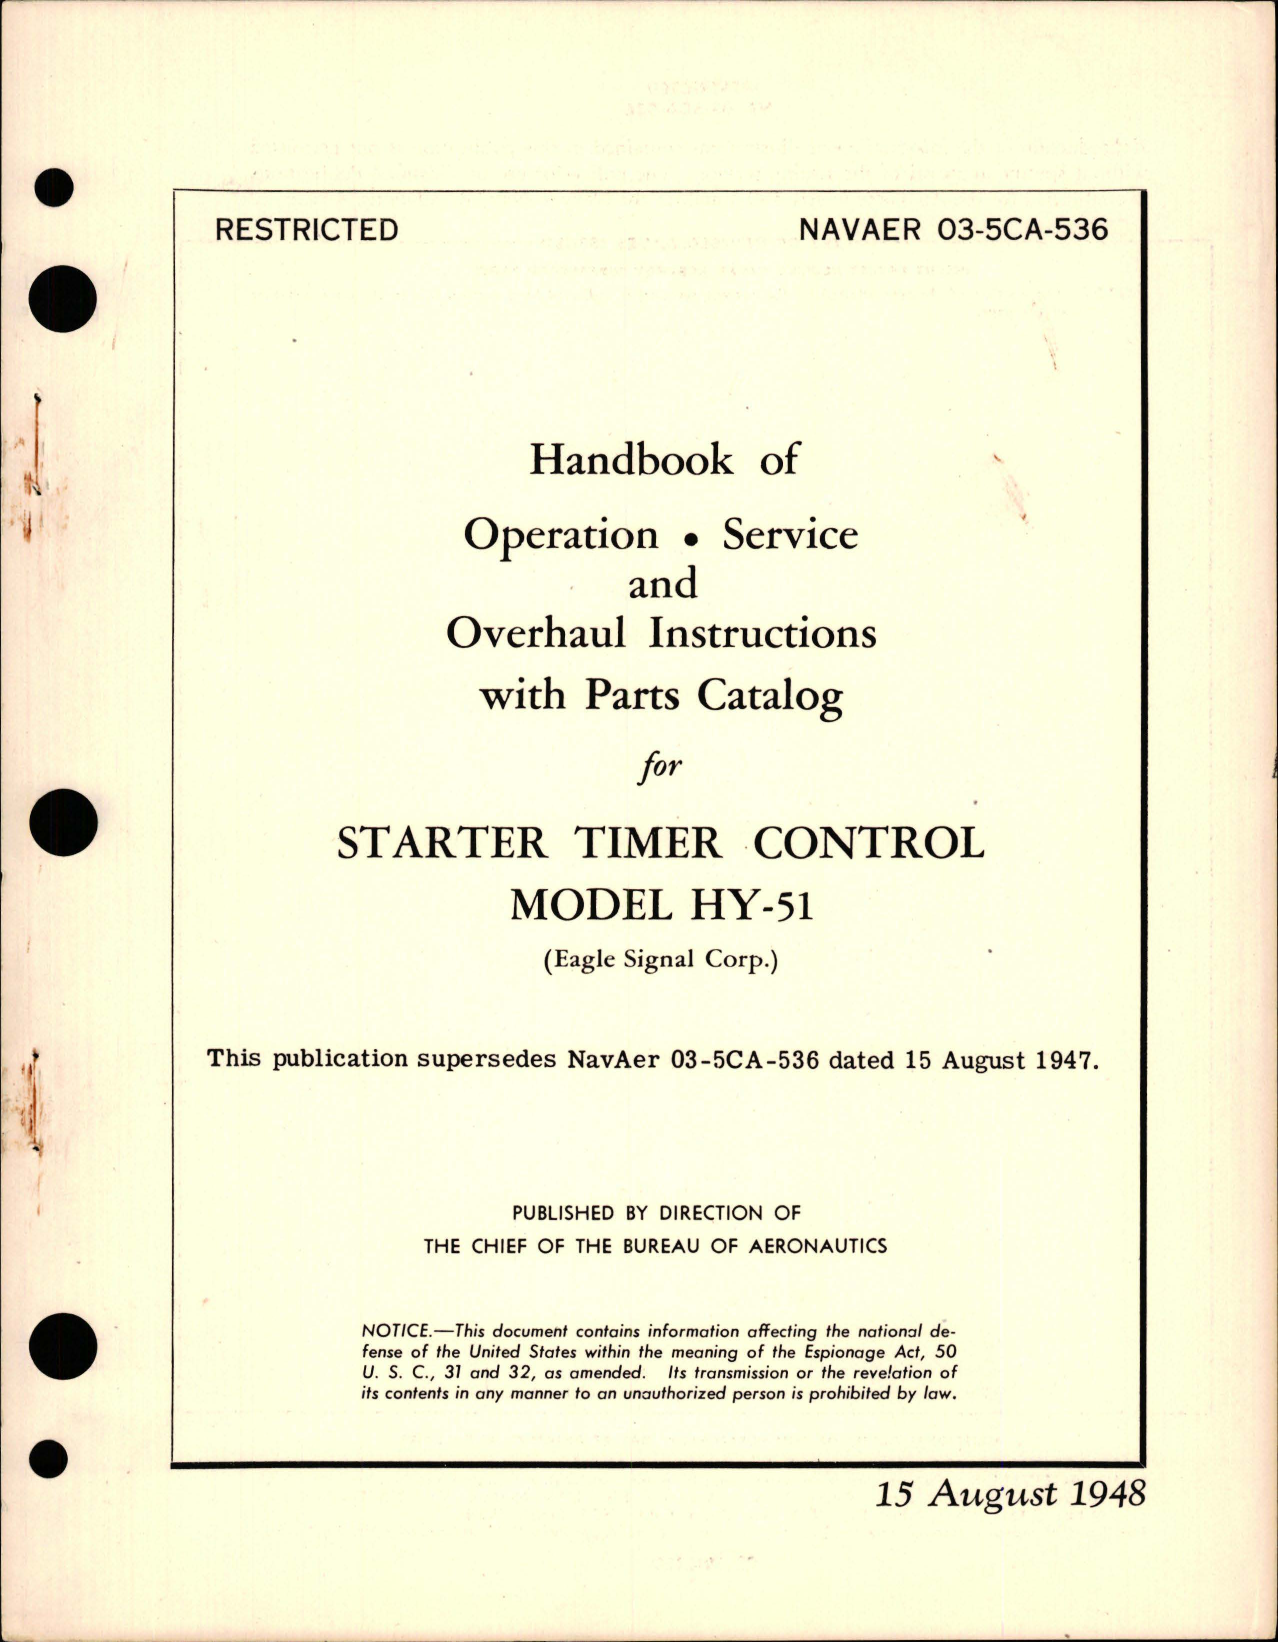 Sample page 1 from AirCorps Library document: Operation, Service, Overhaul Instructions with Parts Catalog for Starter Timer Control - Model HY-51